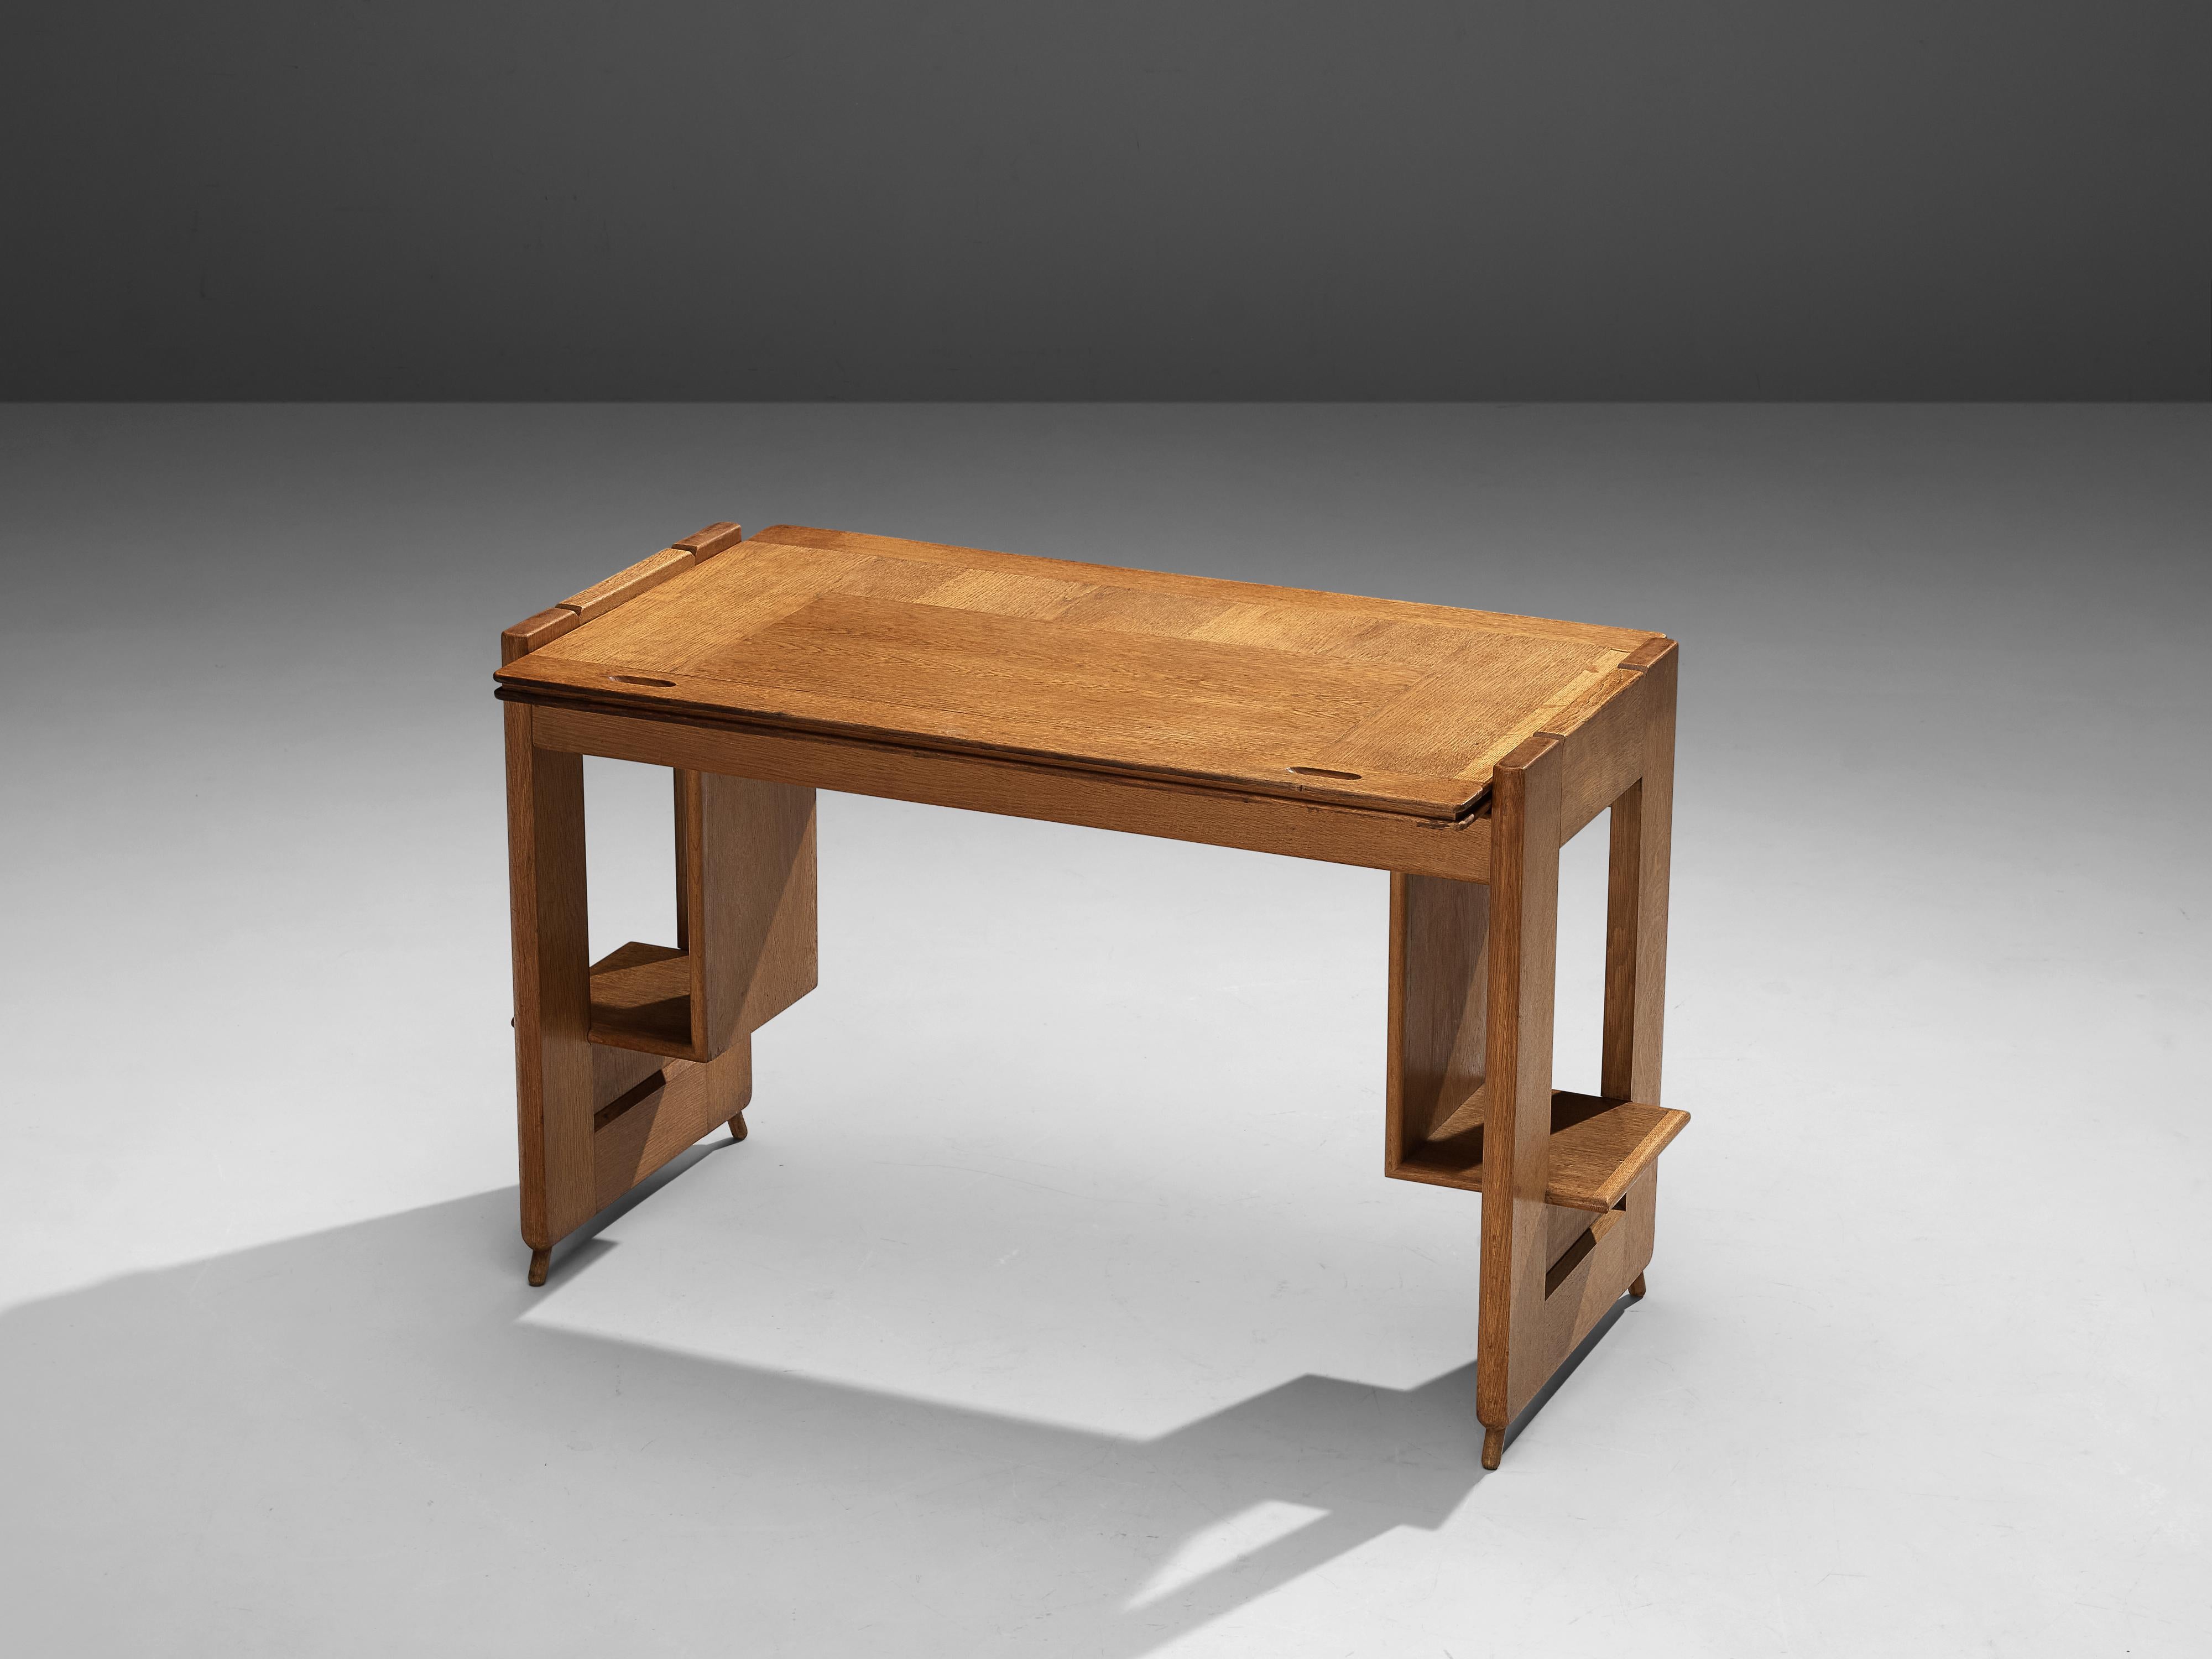 Guillerme et Chambron, desk, oak, France, 1950s

Delicate writing desk by the French designer duo Guillerme et Chambron. The desk in solid oak features two flat legs with integrated storage trays. Special feature holds the tabletop which easily